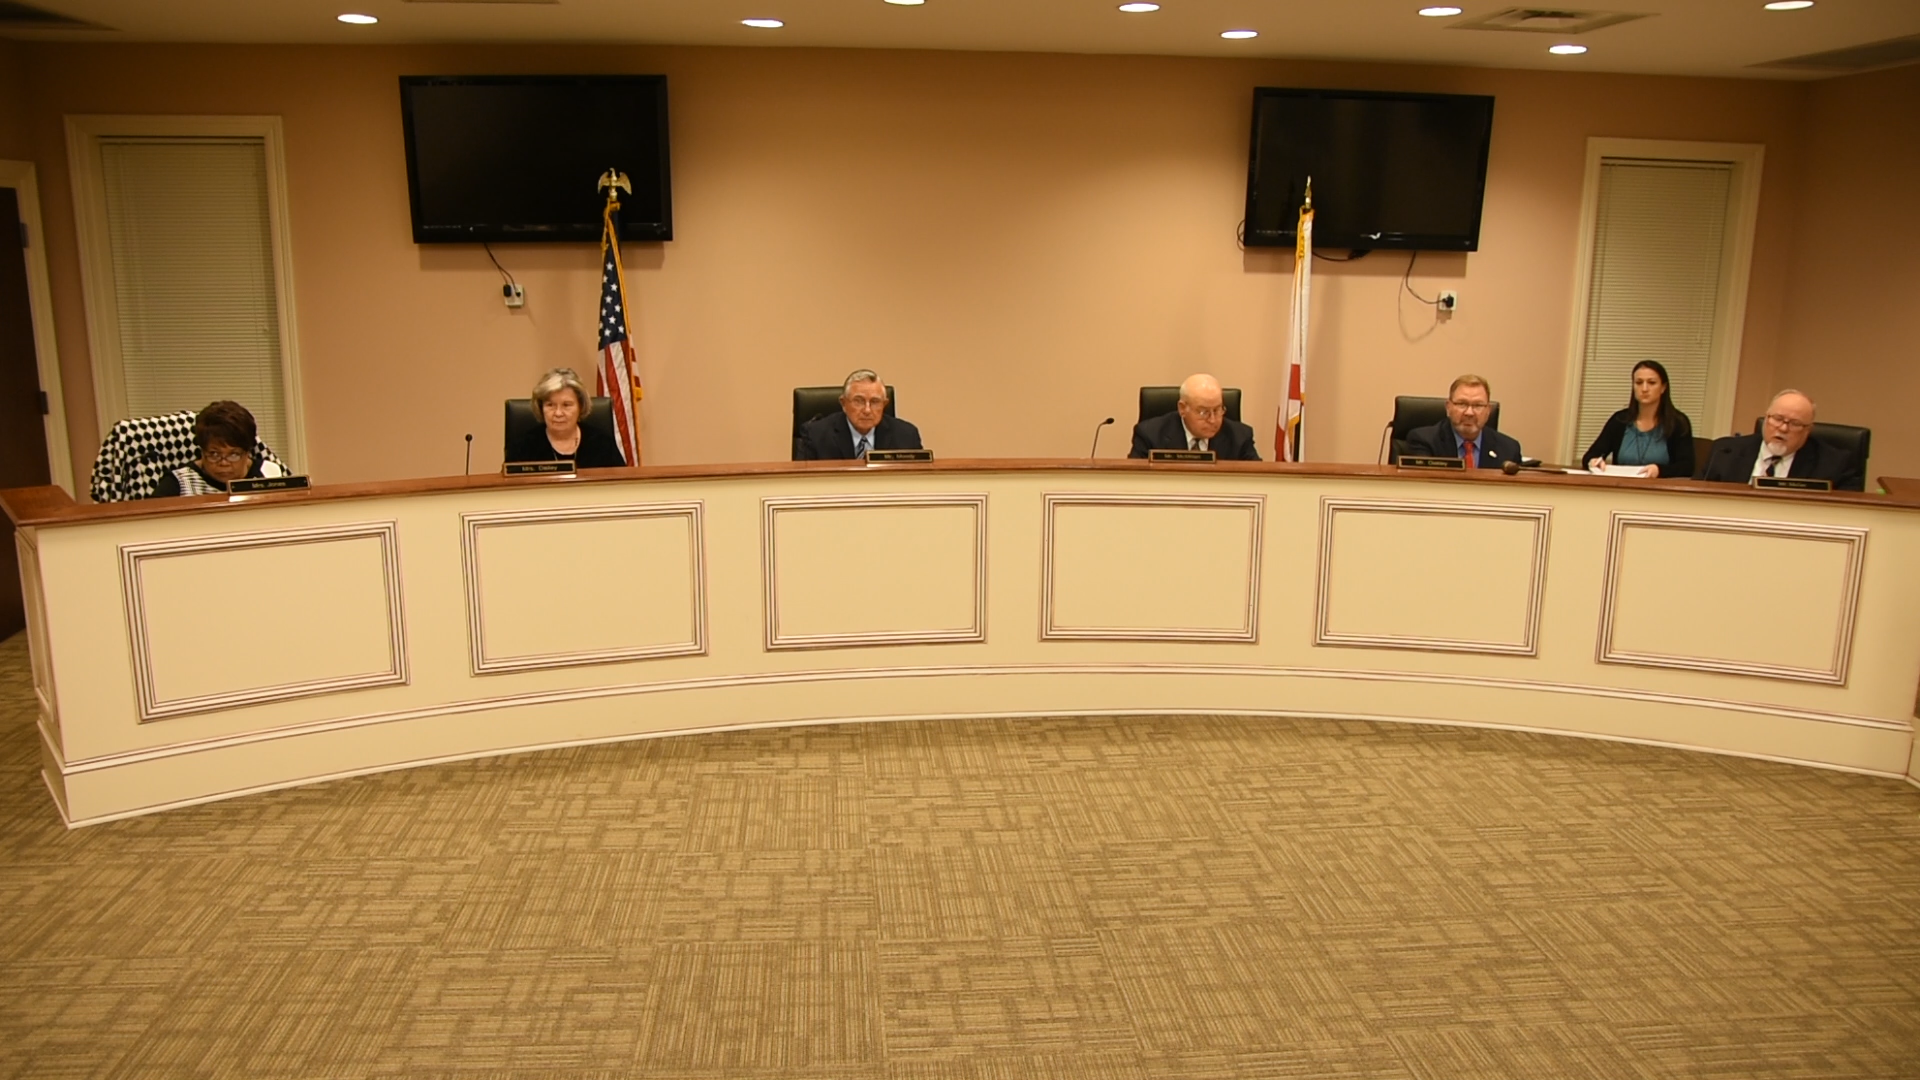 The Bibb County Board of Education meeting on December 11, 2018